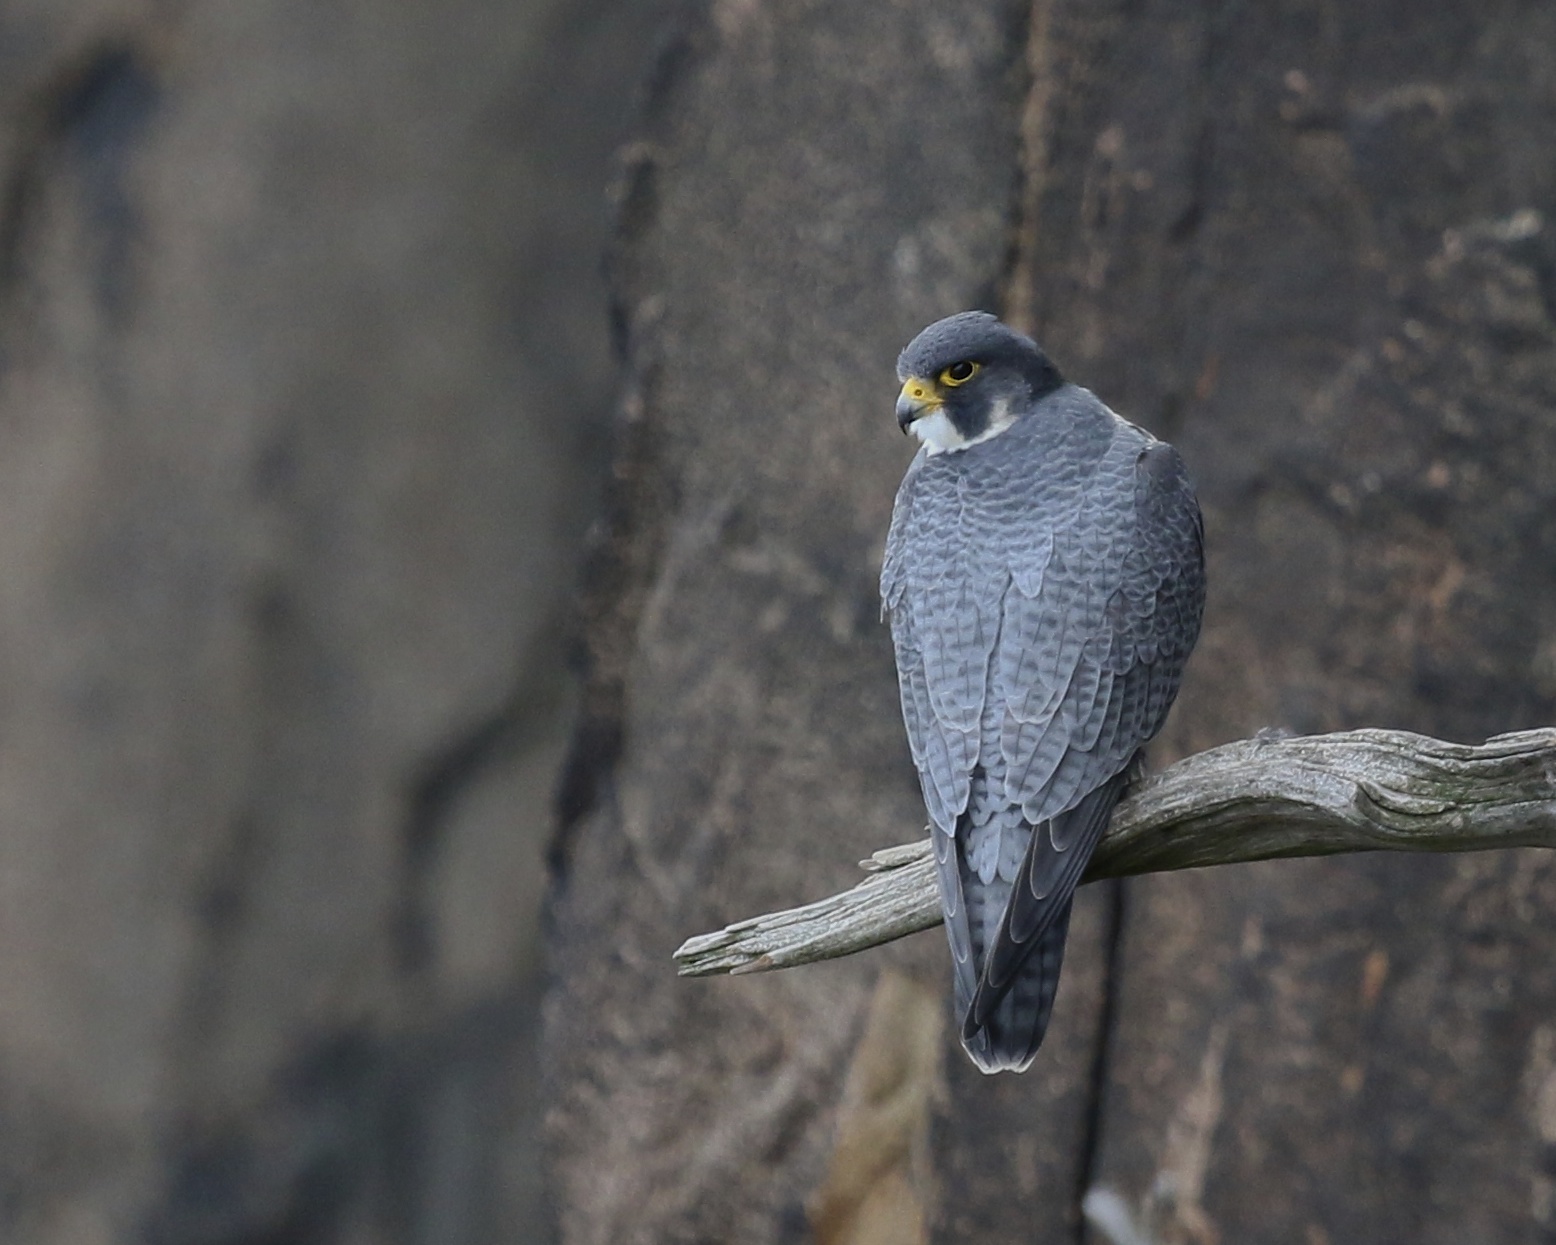 A perched Peregrine Falcon at State Line Hawk Watch, 10/26/14.